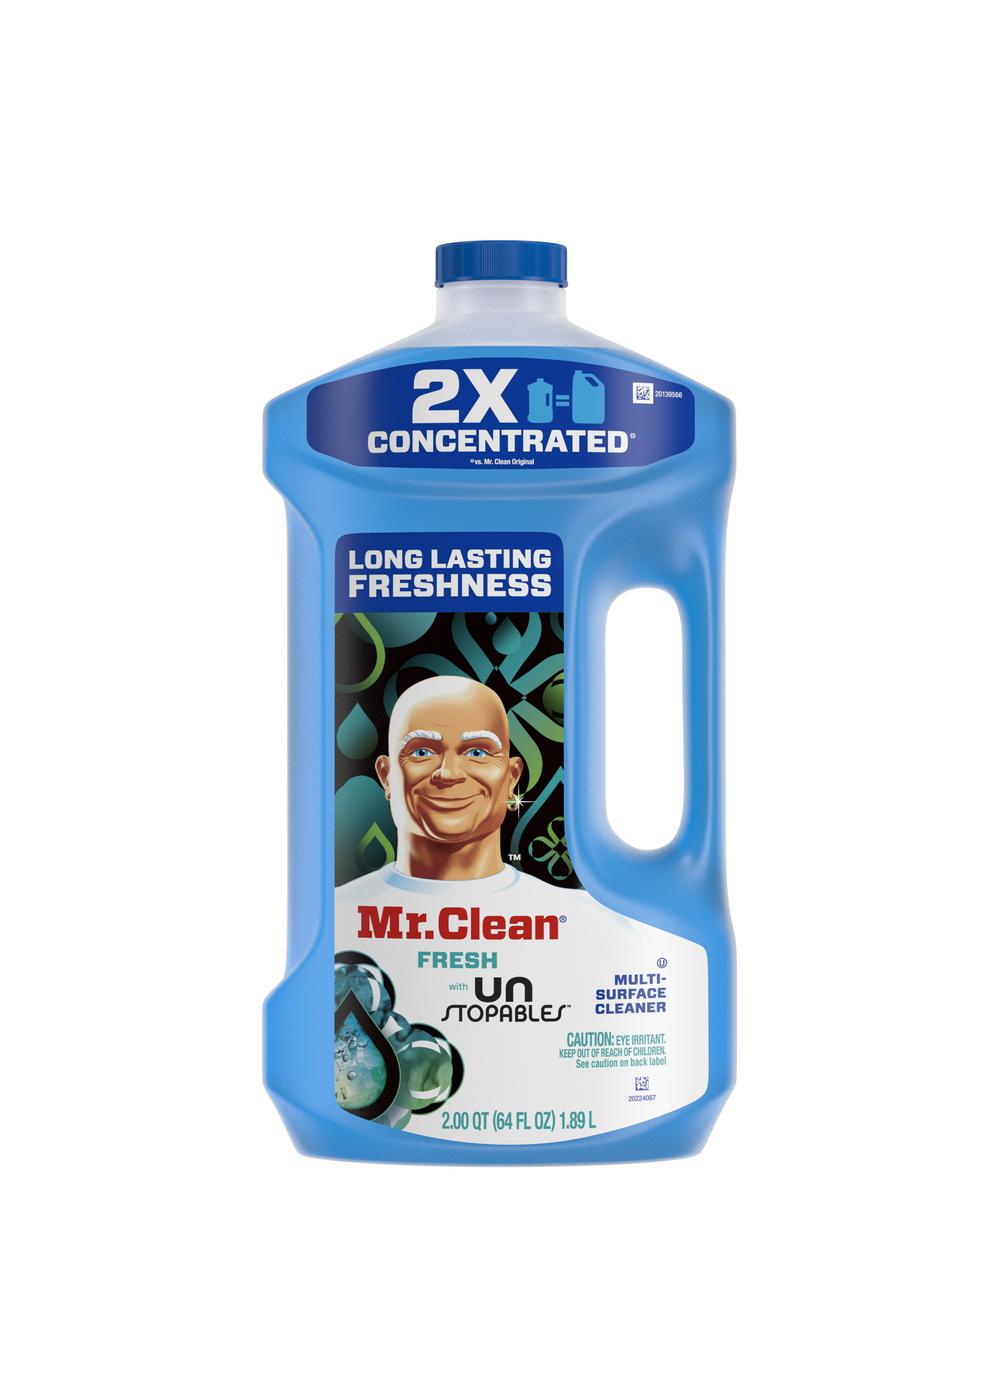 Mr. Clean Liquid Fresh Unstopables Multi-Surface Cleaner; image 1 of 2